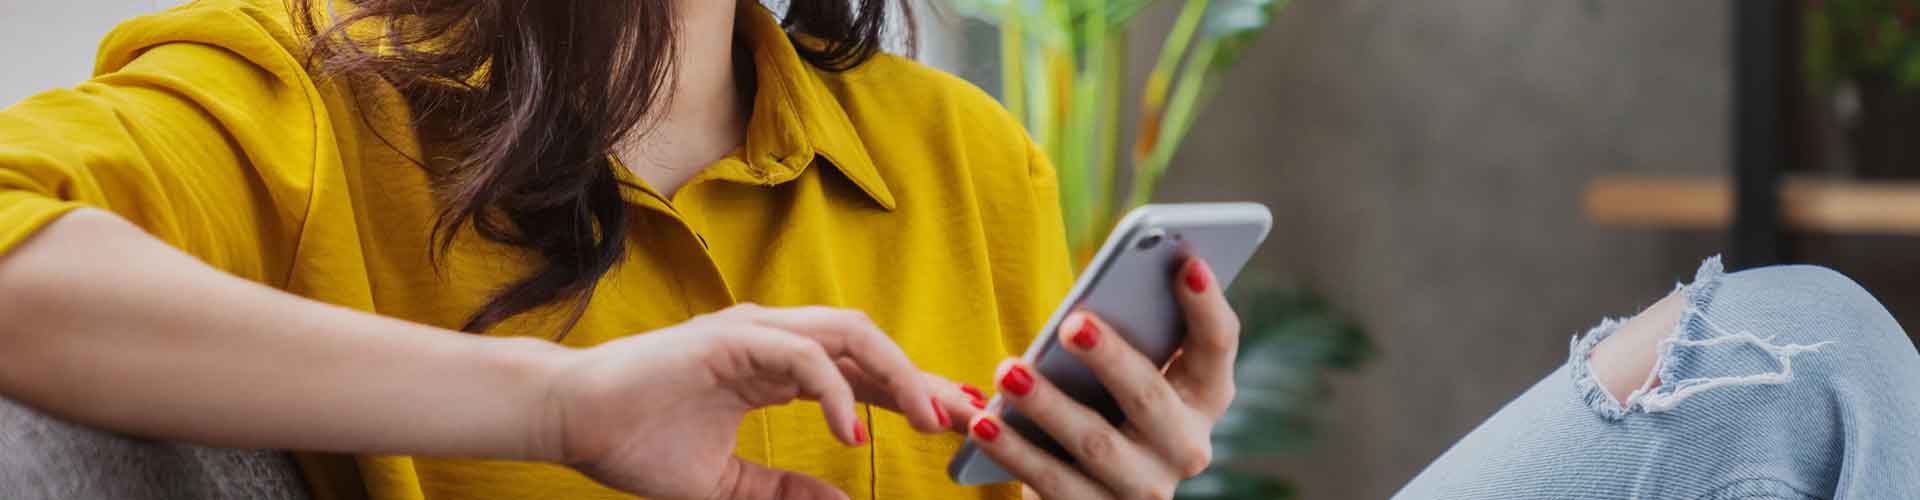 6 Ways Pre And Post-Appointment Reminder Texting Can Improve Customer Satisfaction